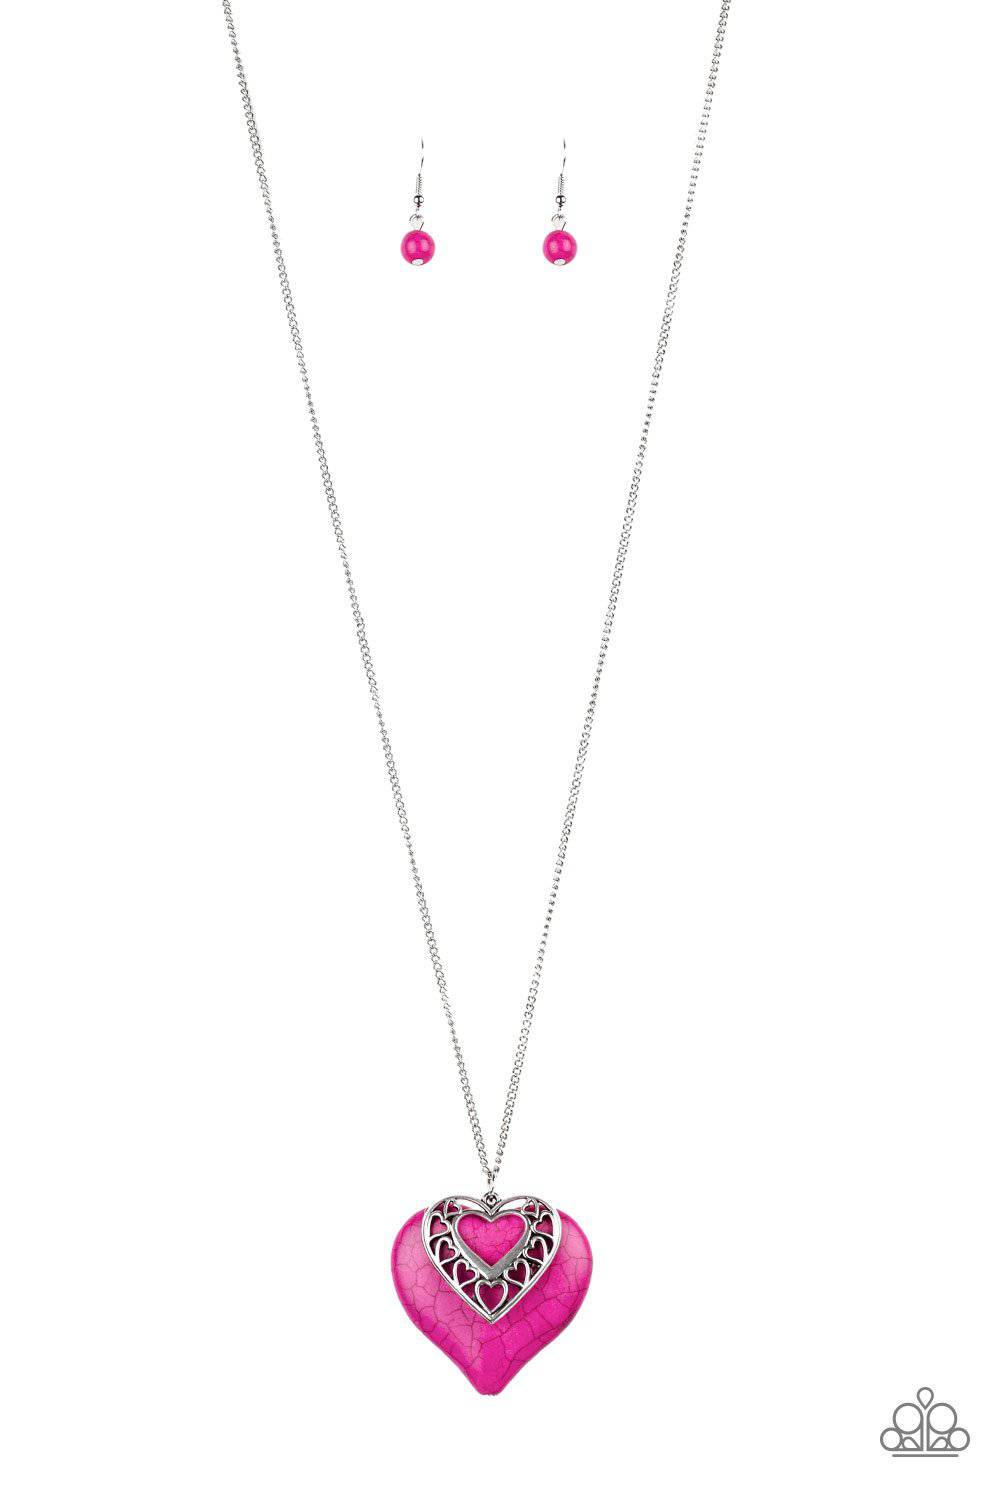 Southern Heart - Pink Heart Necklace - Paparazzi Accessories - GlaMarous Titi Jewels